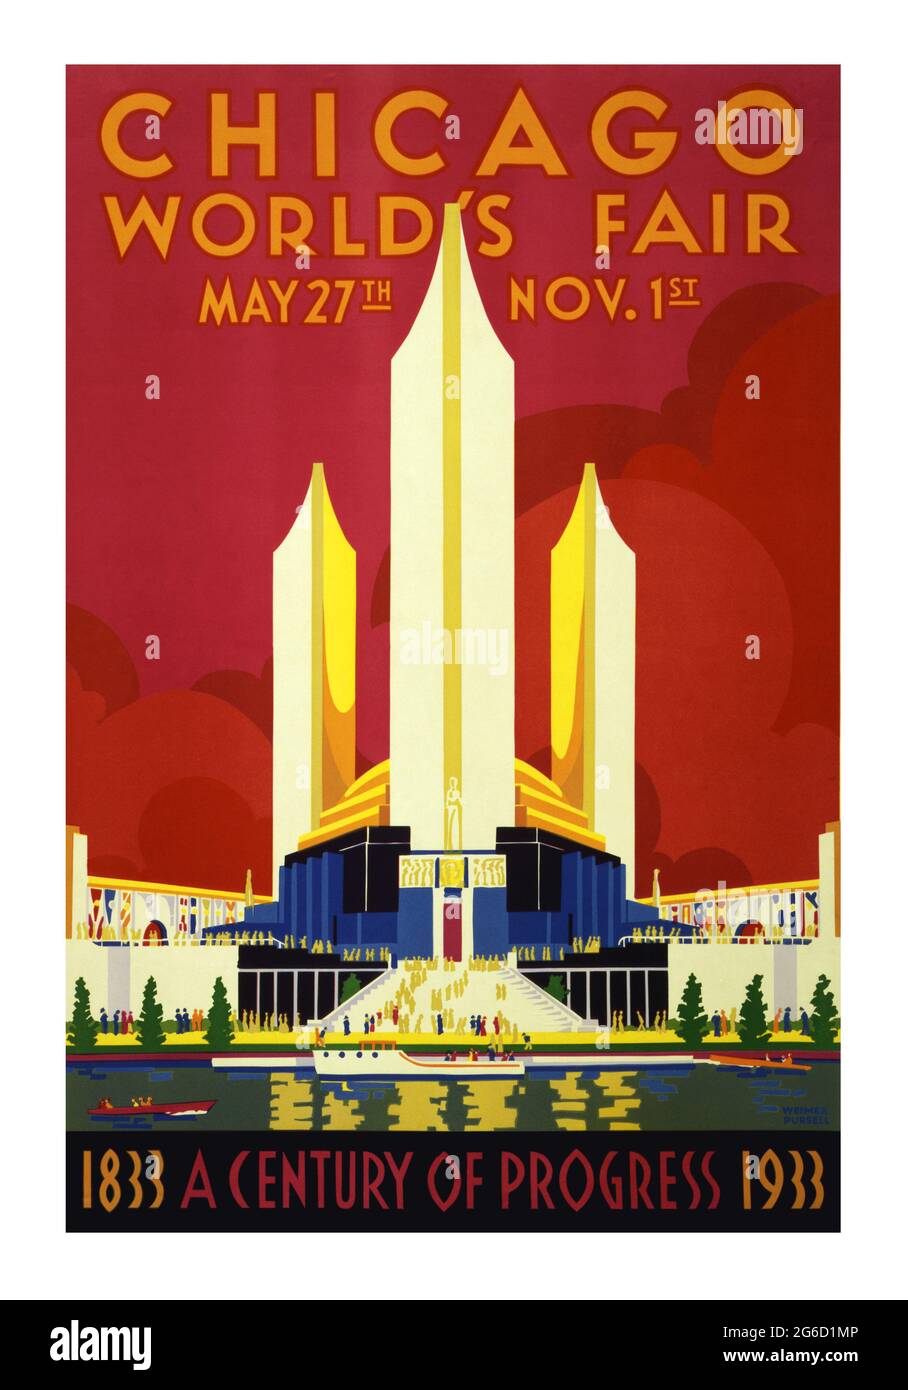 A Century of Progress International Exposition, also known as the Chicago World's Fair. Chicago poster 1933. Technological innovation. Stock Photo